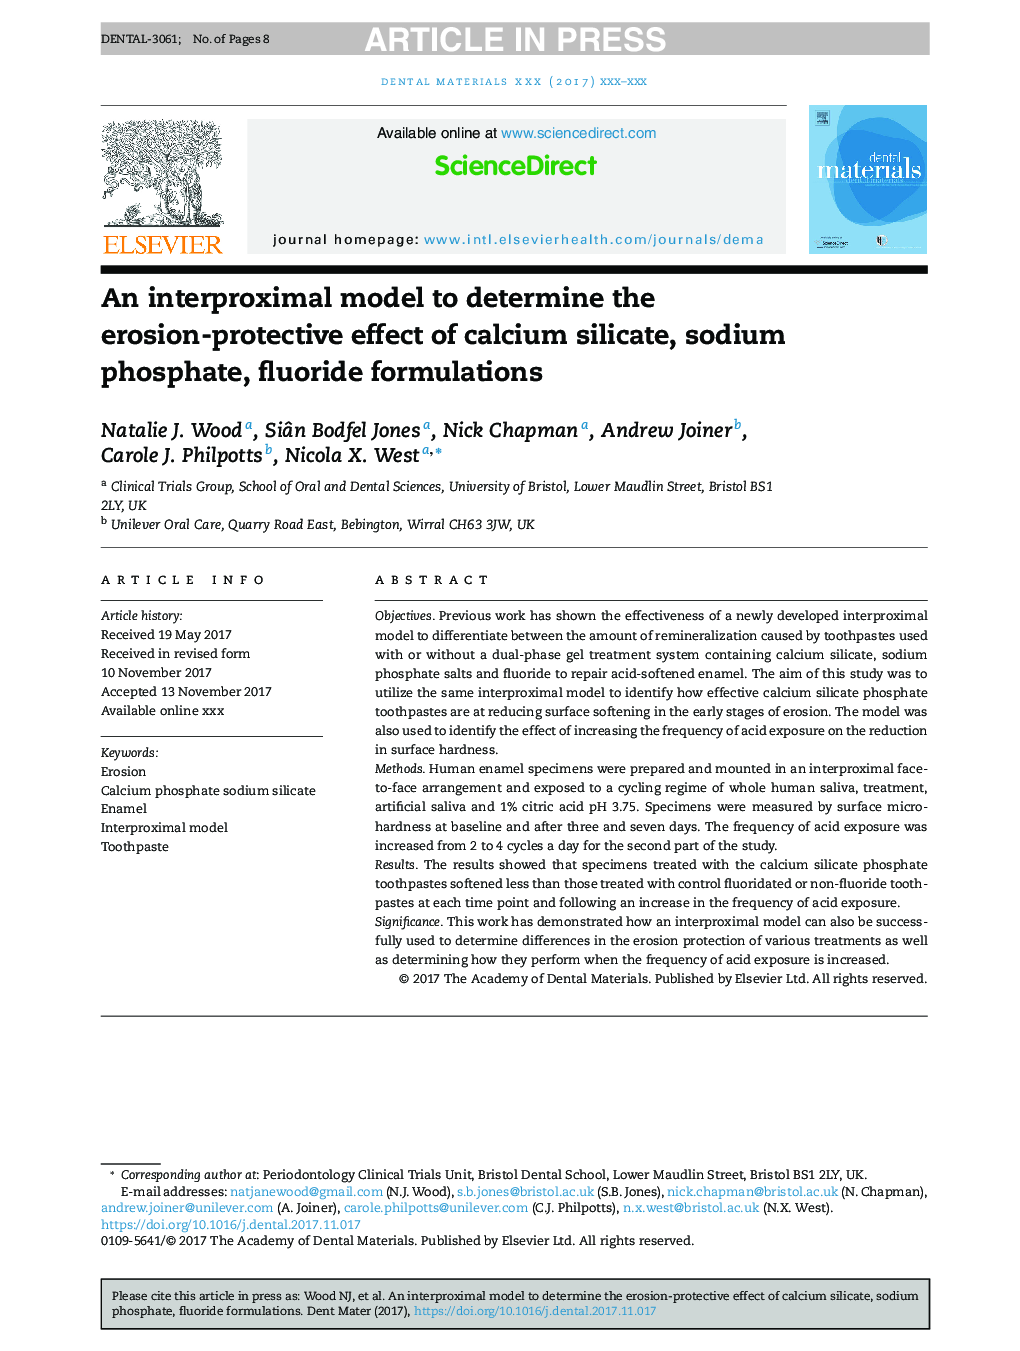 An interproximal model to determine the erosion-protective effect of calcium silicate, sodium phosphate, fluoride formulations